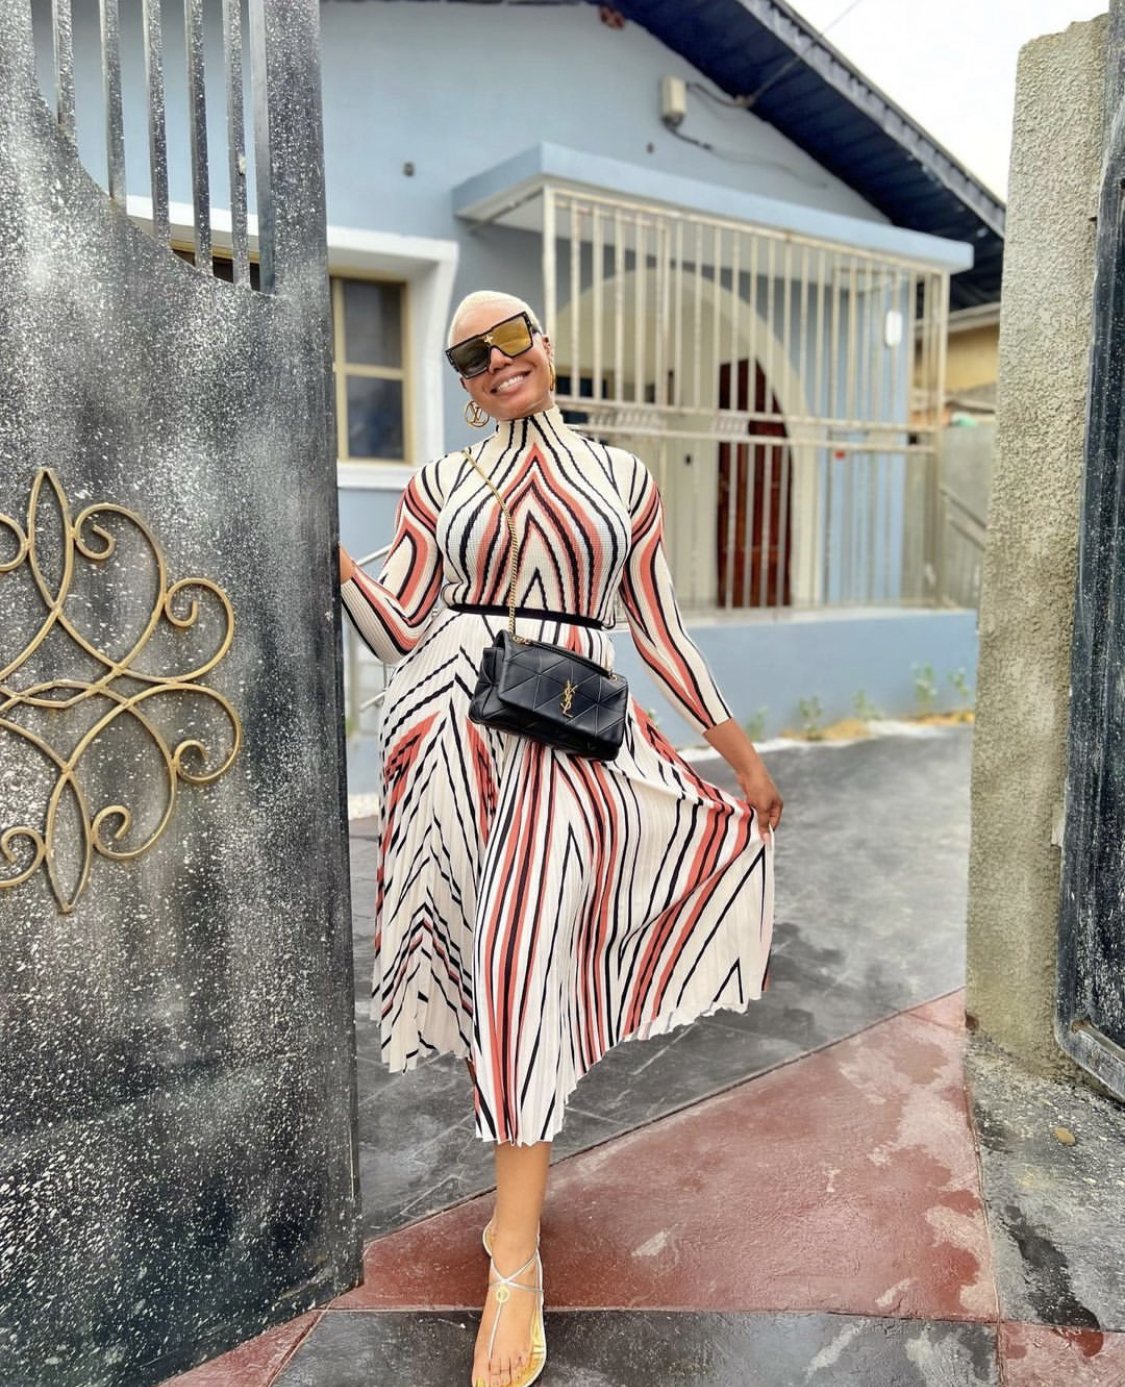 Actress Nancy Isime shows off massive 6-bedroom house she built for father [photos]